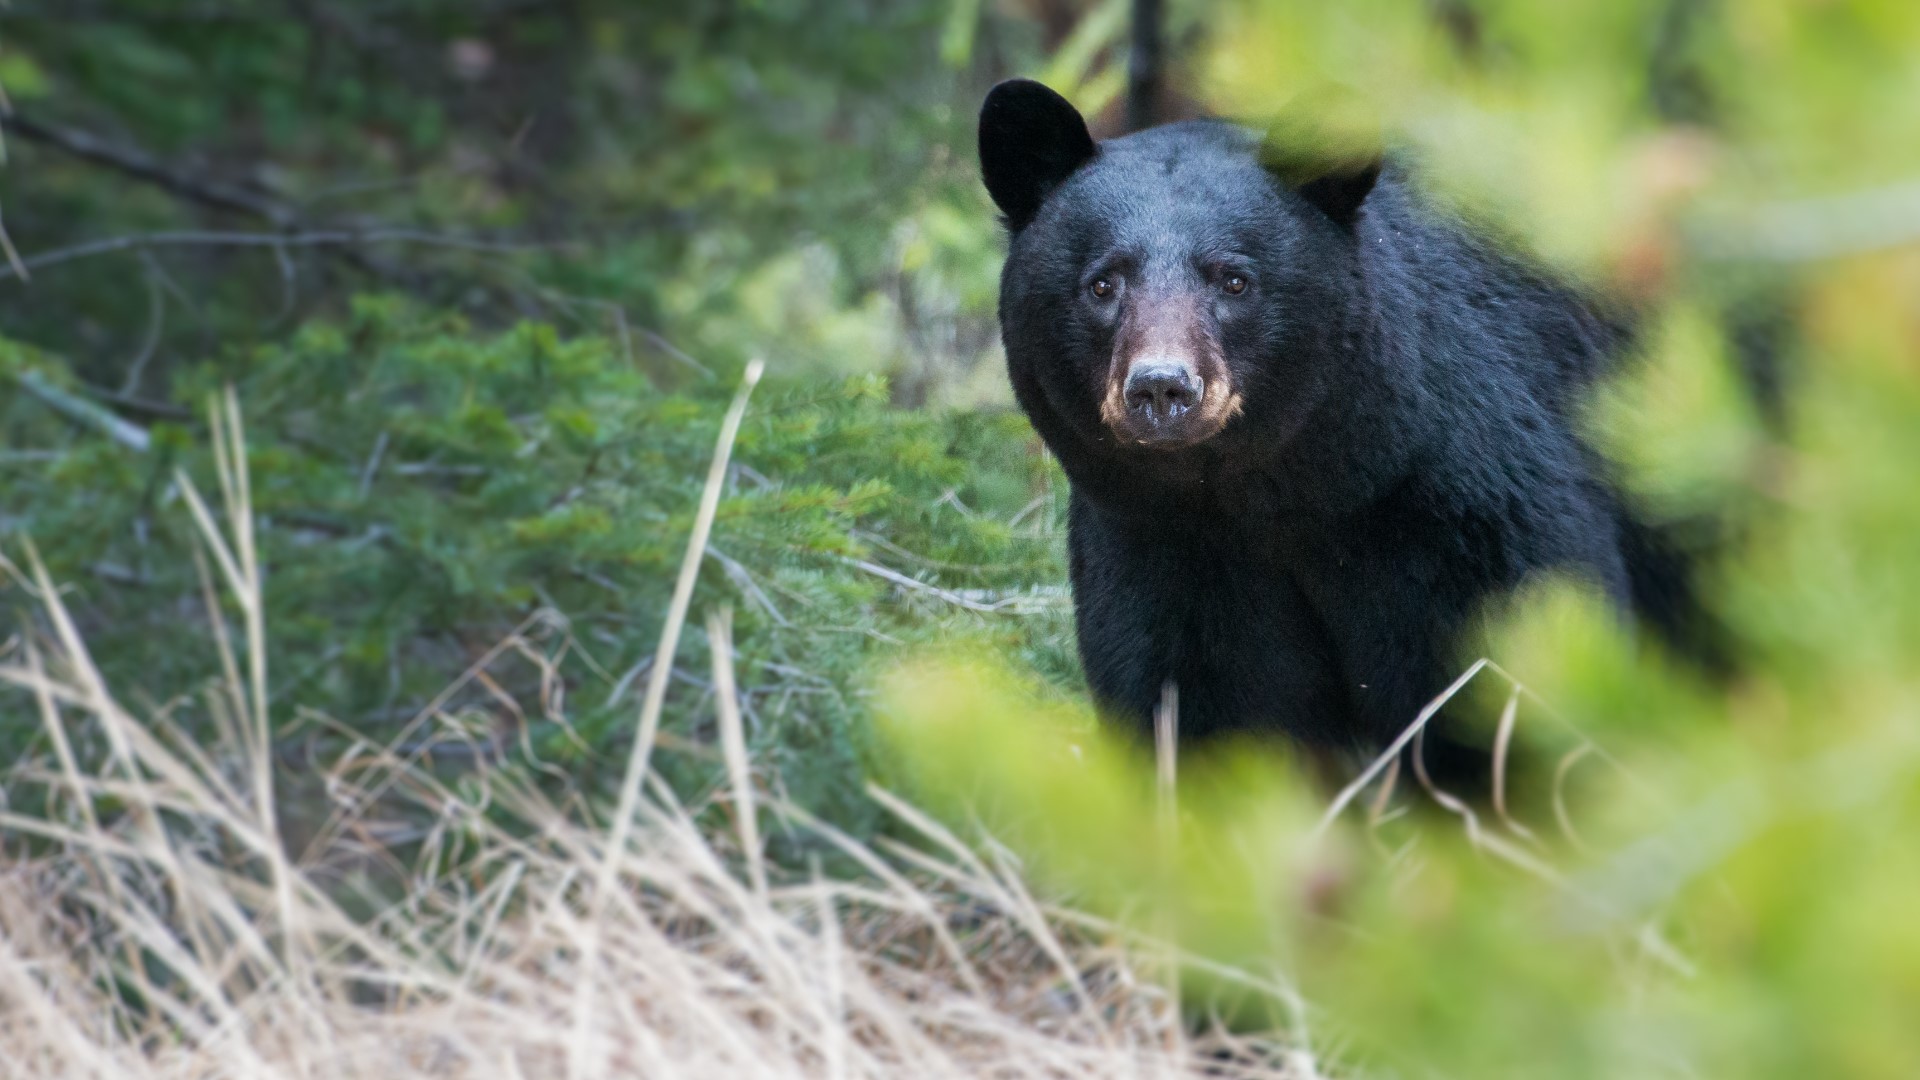 Bear researchers are asking residents to secure trash and bird feeders while they study long-term climate impacts on the species.